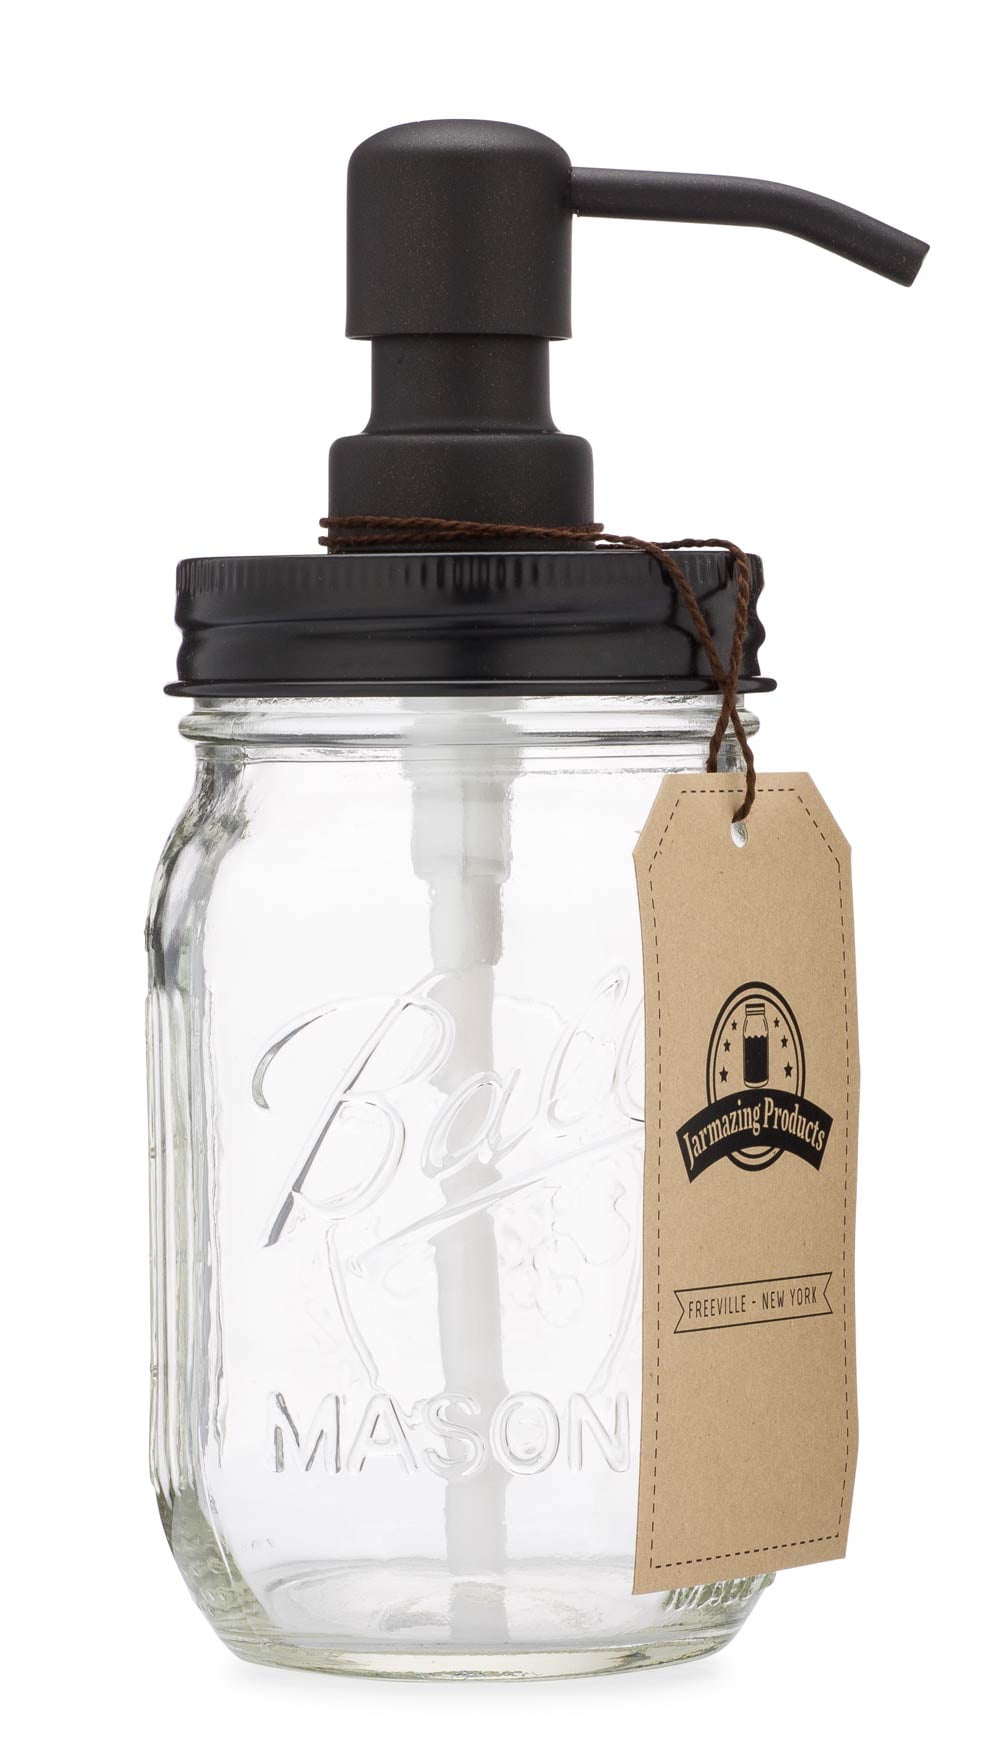 Made from Rust Proof Stainless Steel with 16 Ounce Ball Mason Jar Jarmazing Products Mason Jar Soap Dispenser Black